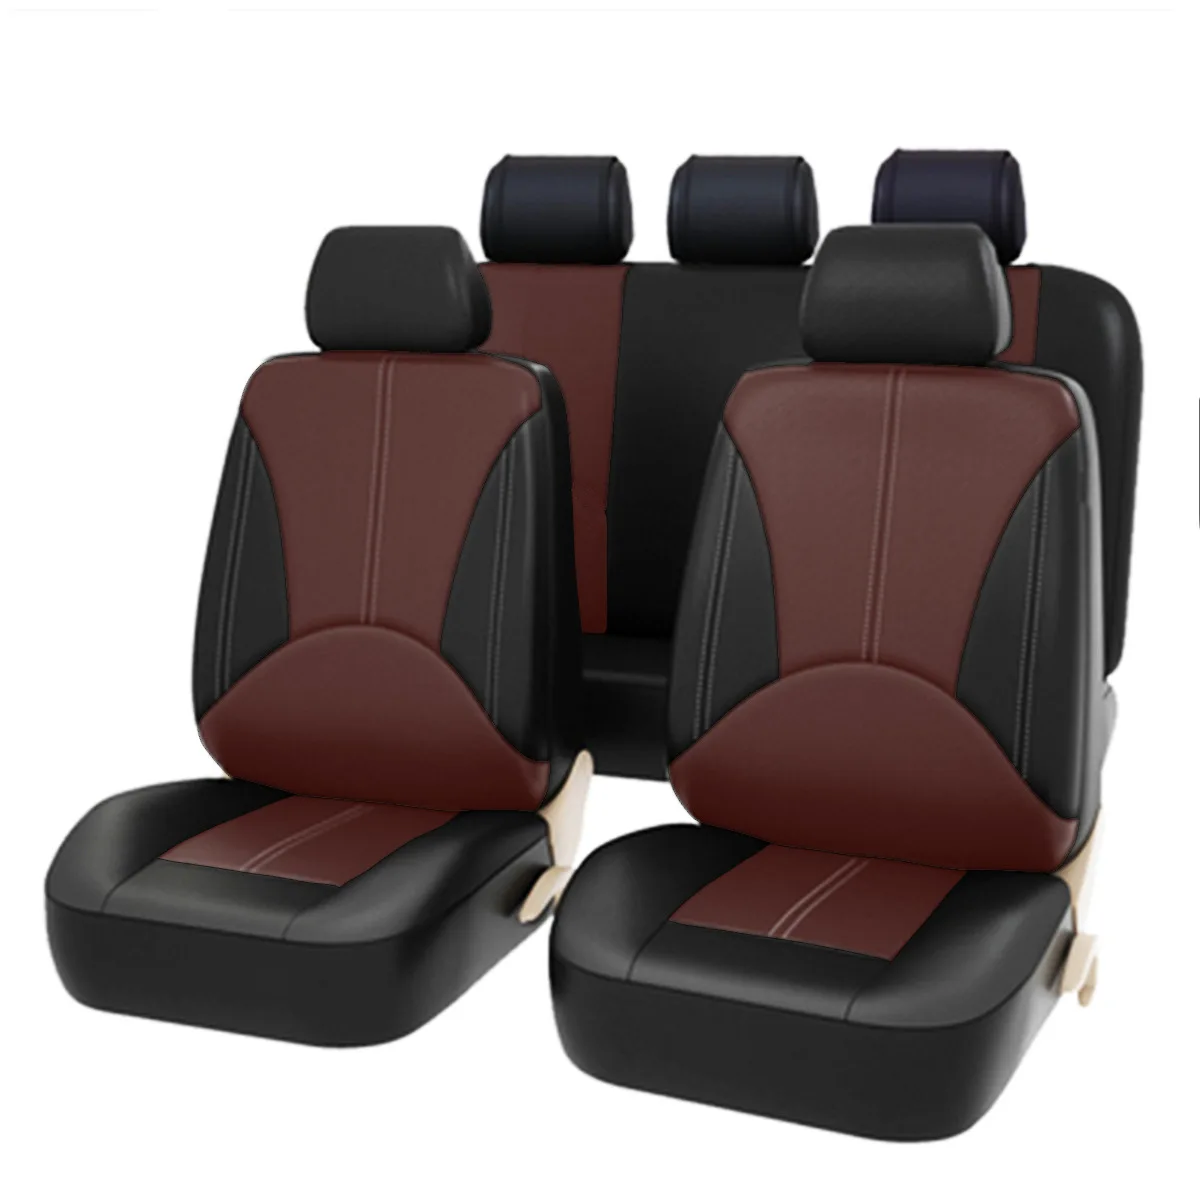 Top Selling Universal  Luxury  Leather Car Seat Covers Full Set Seat Cover For honda/toyota